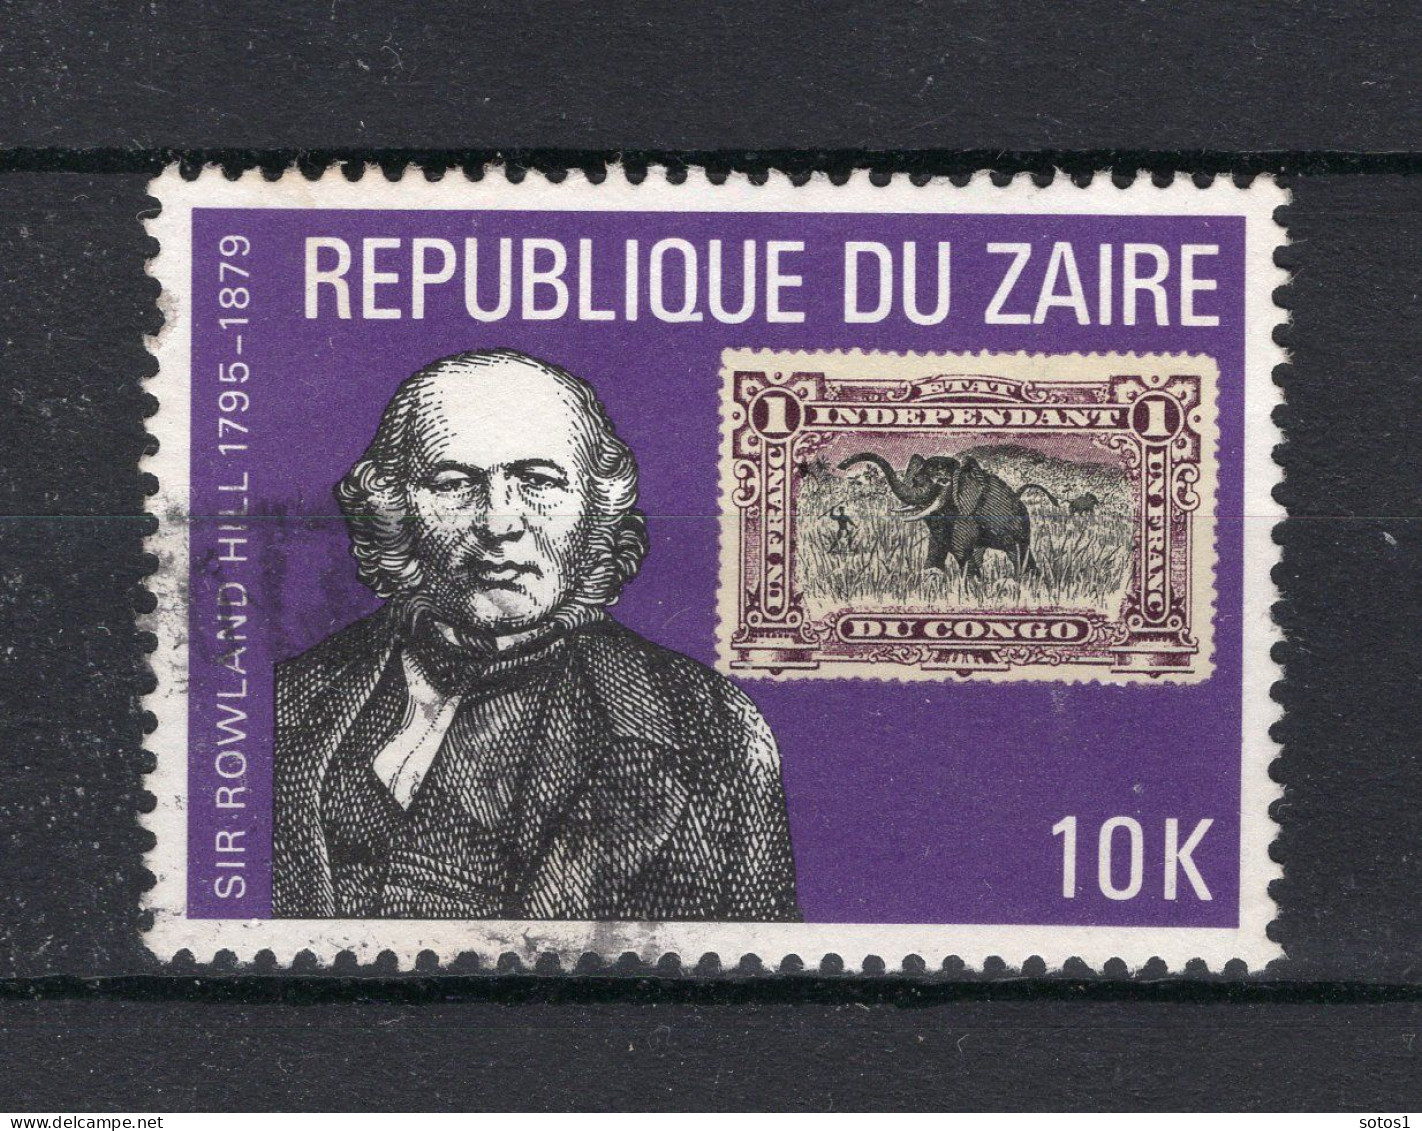 ZAIRE 1003° Gestempeld 1980 - Used Stamps